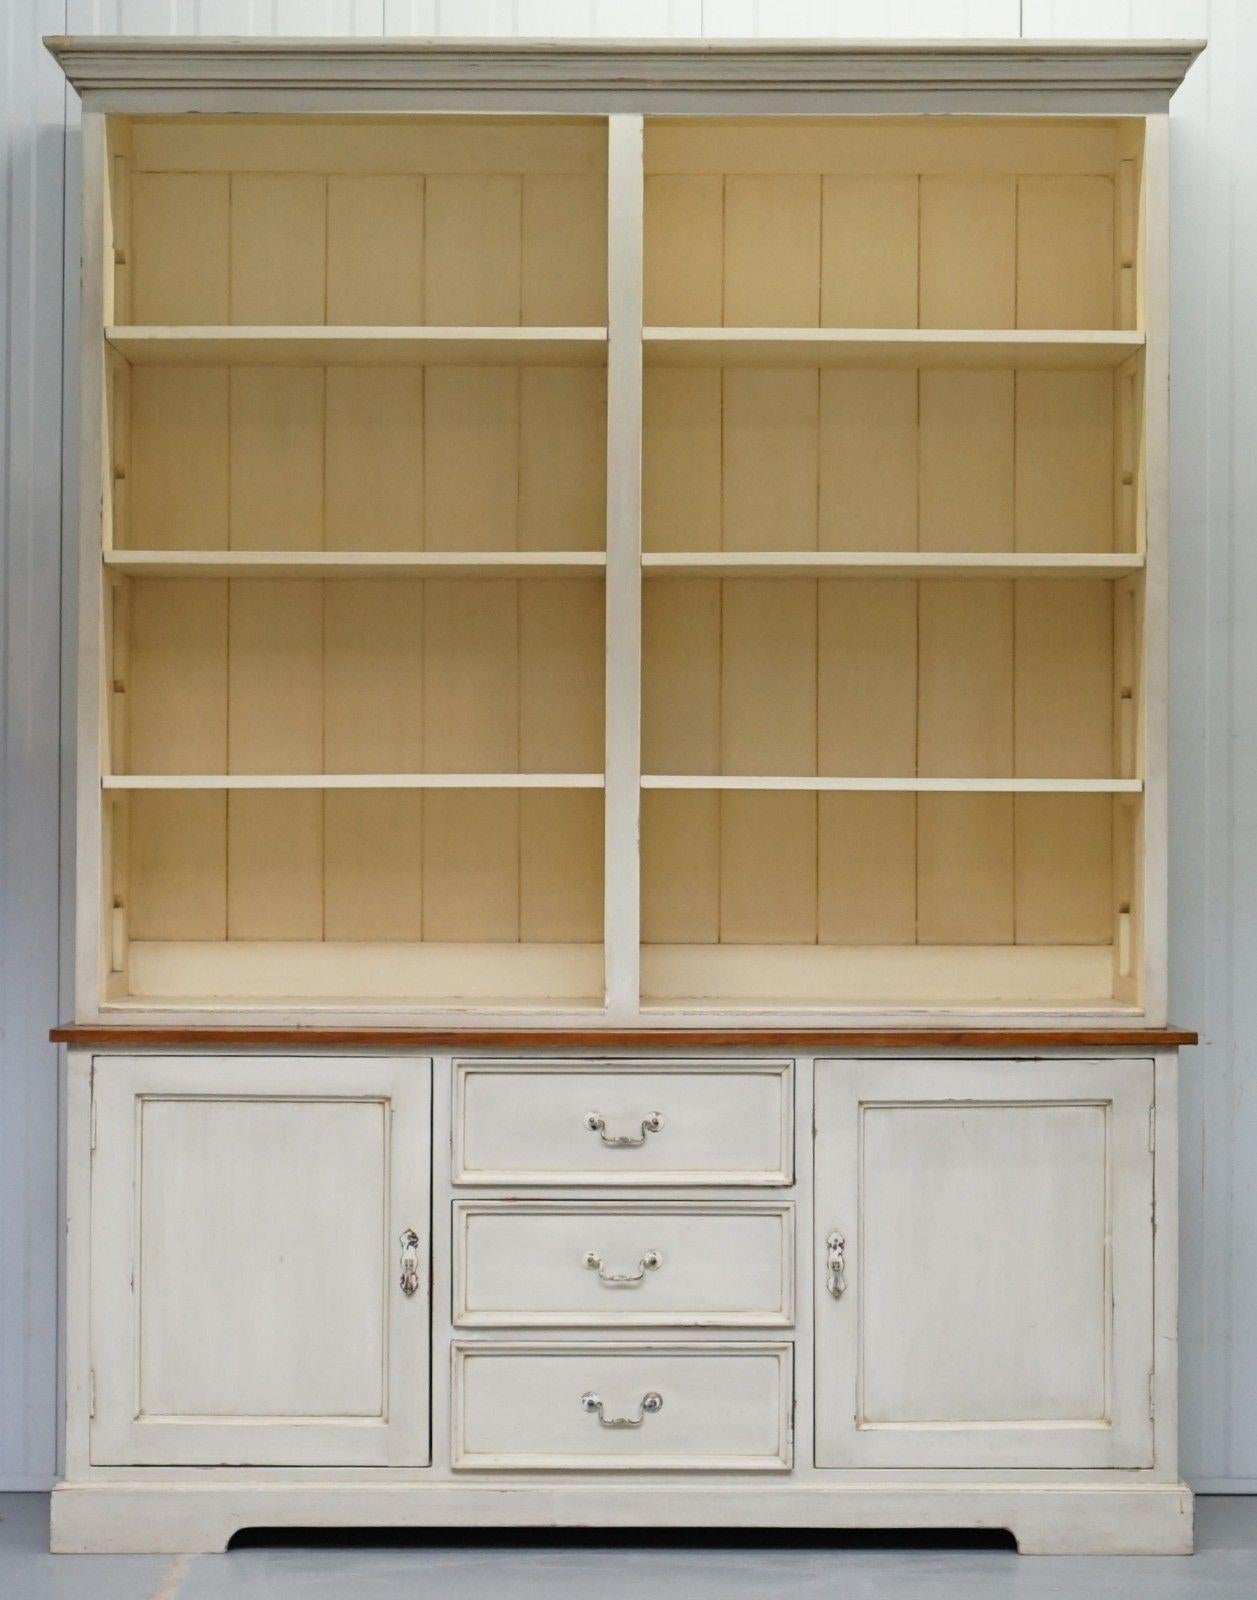 We are delighted to this stunning Shaker inspired kitchen haberdashery cupboard bookcase cabinet

A very good looking and well made vintage piece of furniture, it is around 40-50 years old, made from solid oak, the shelves are all removable and